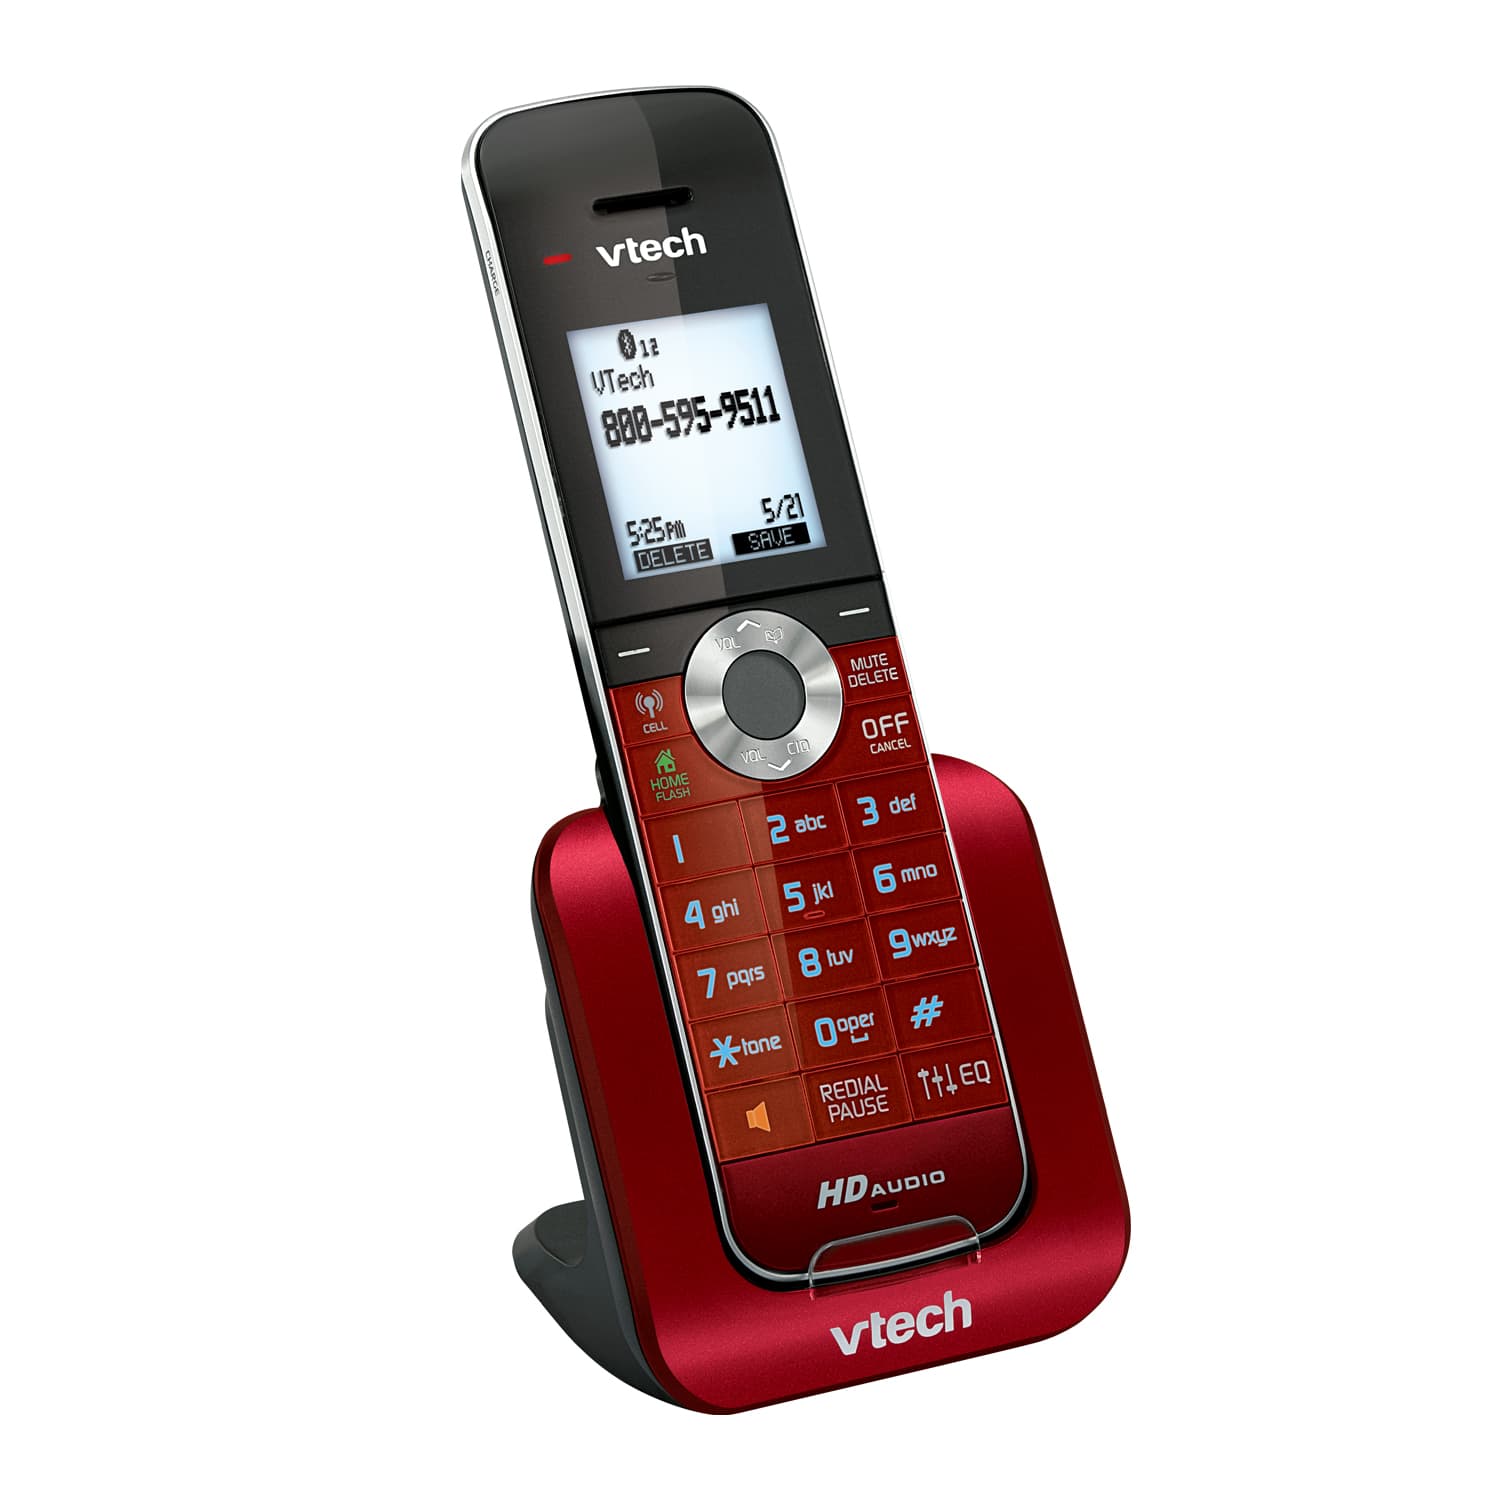 5 Handset Connect to Cell™ Answering System with Caller ID/Call Waiting - view 8